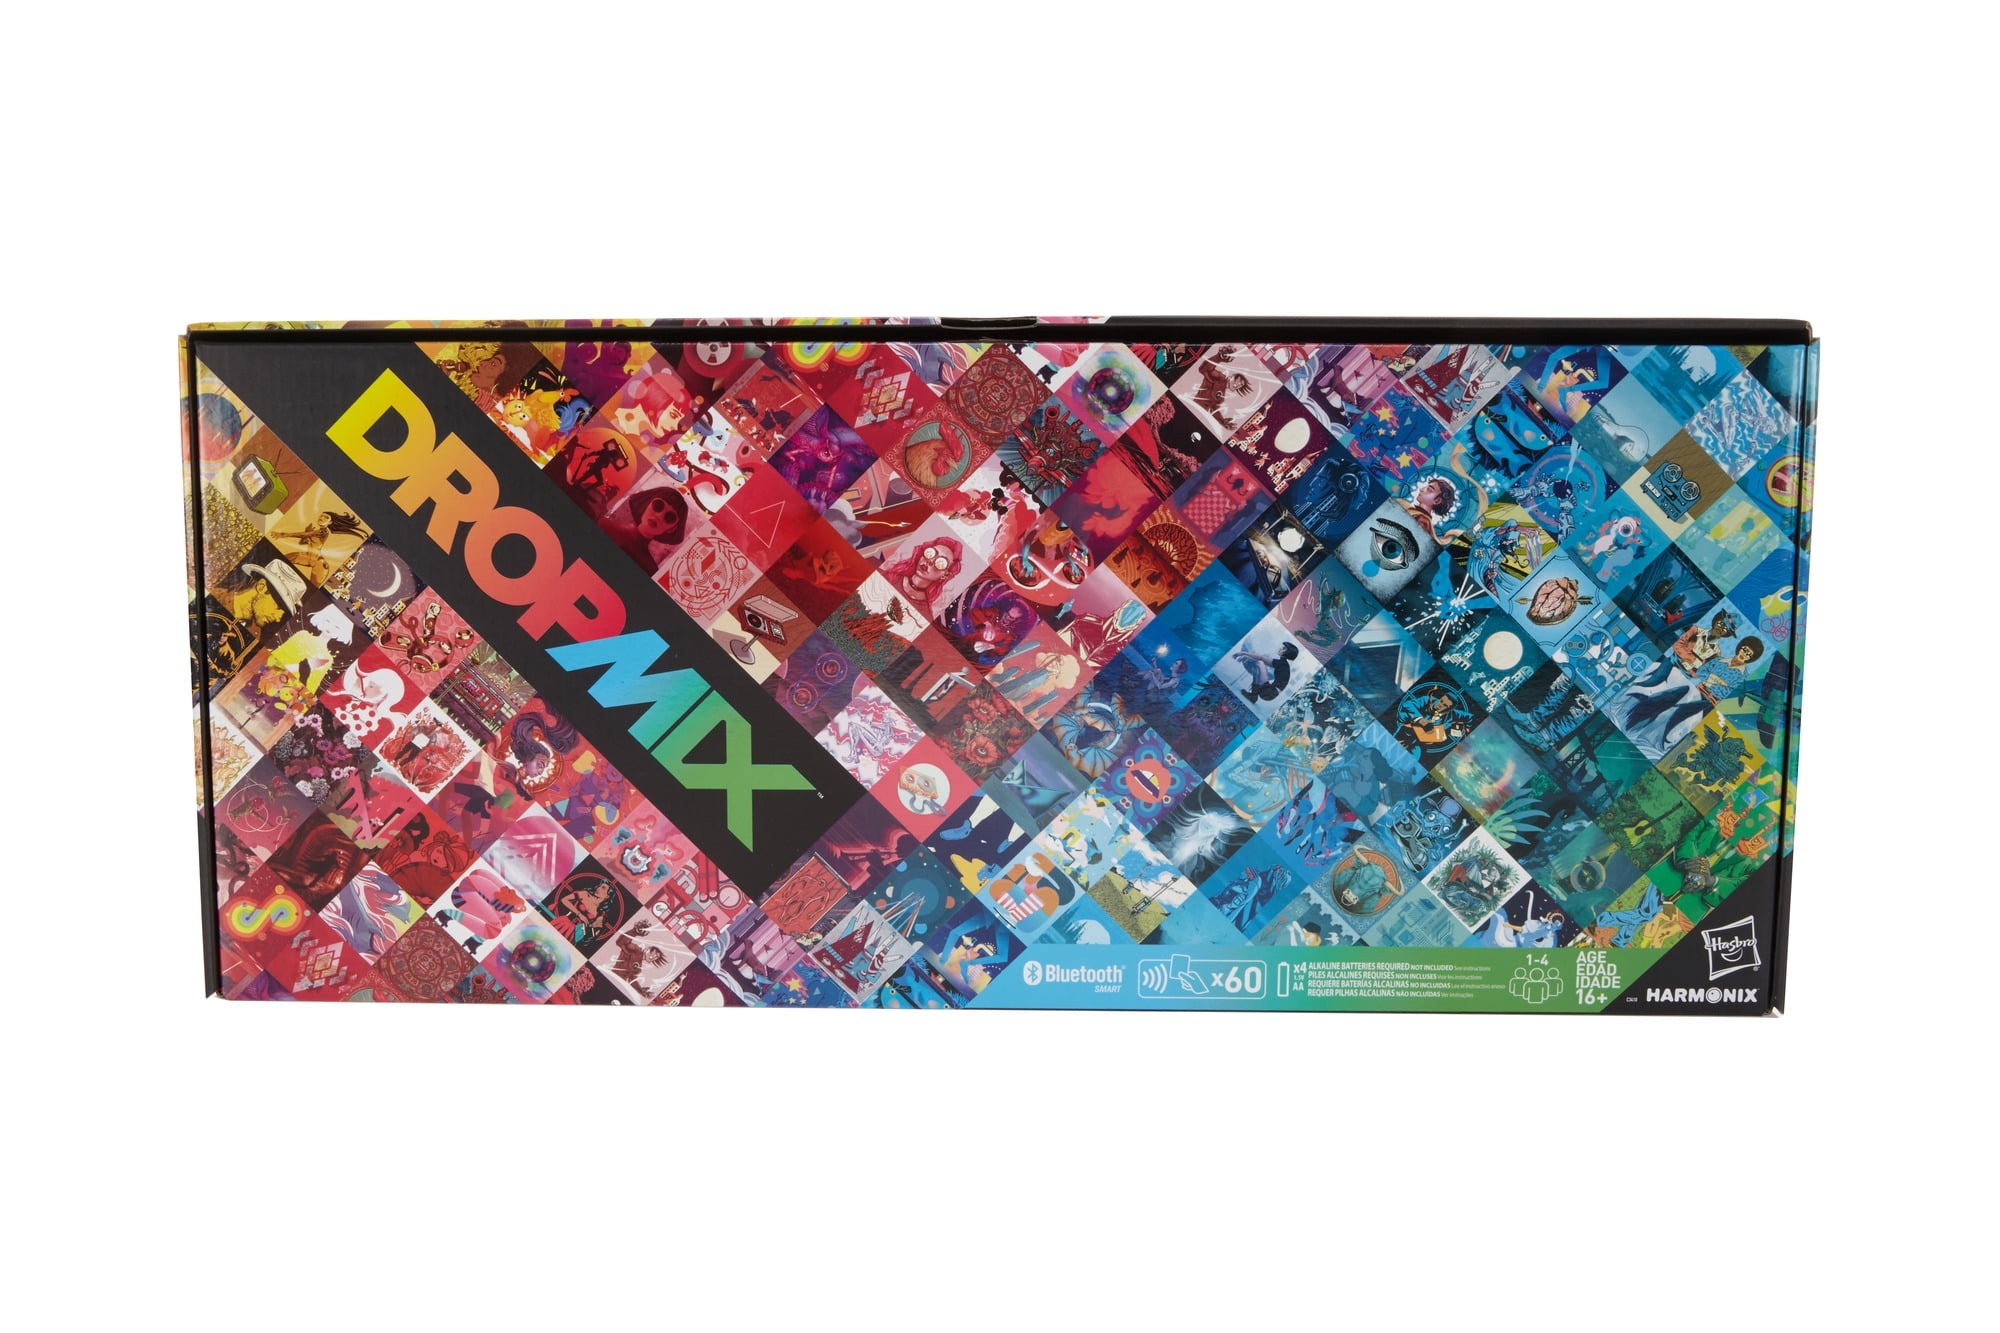 Hasbro C3410 DropMix Music Mixing Gaming System for sale online 